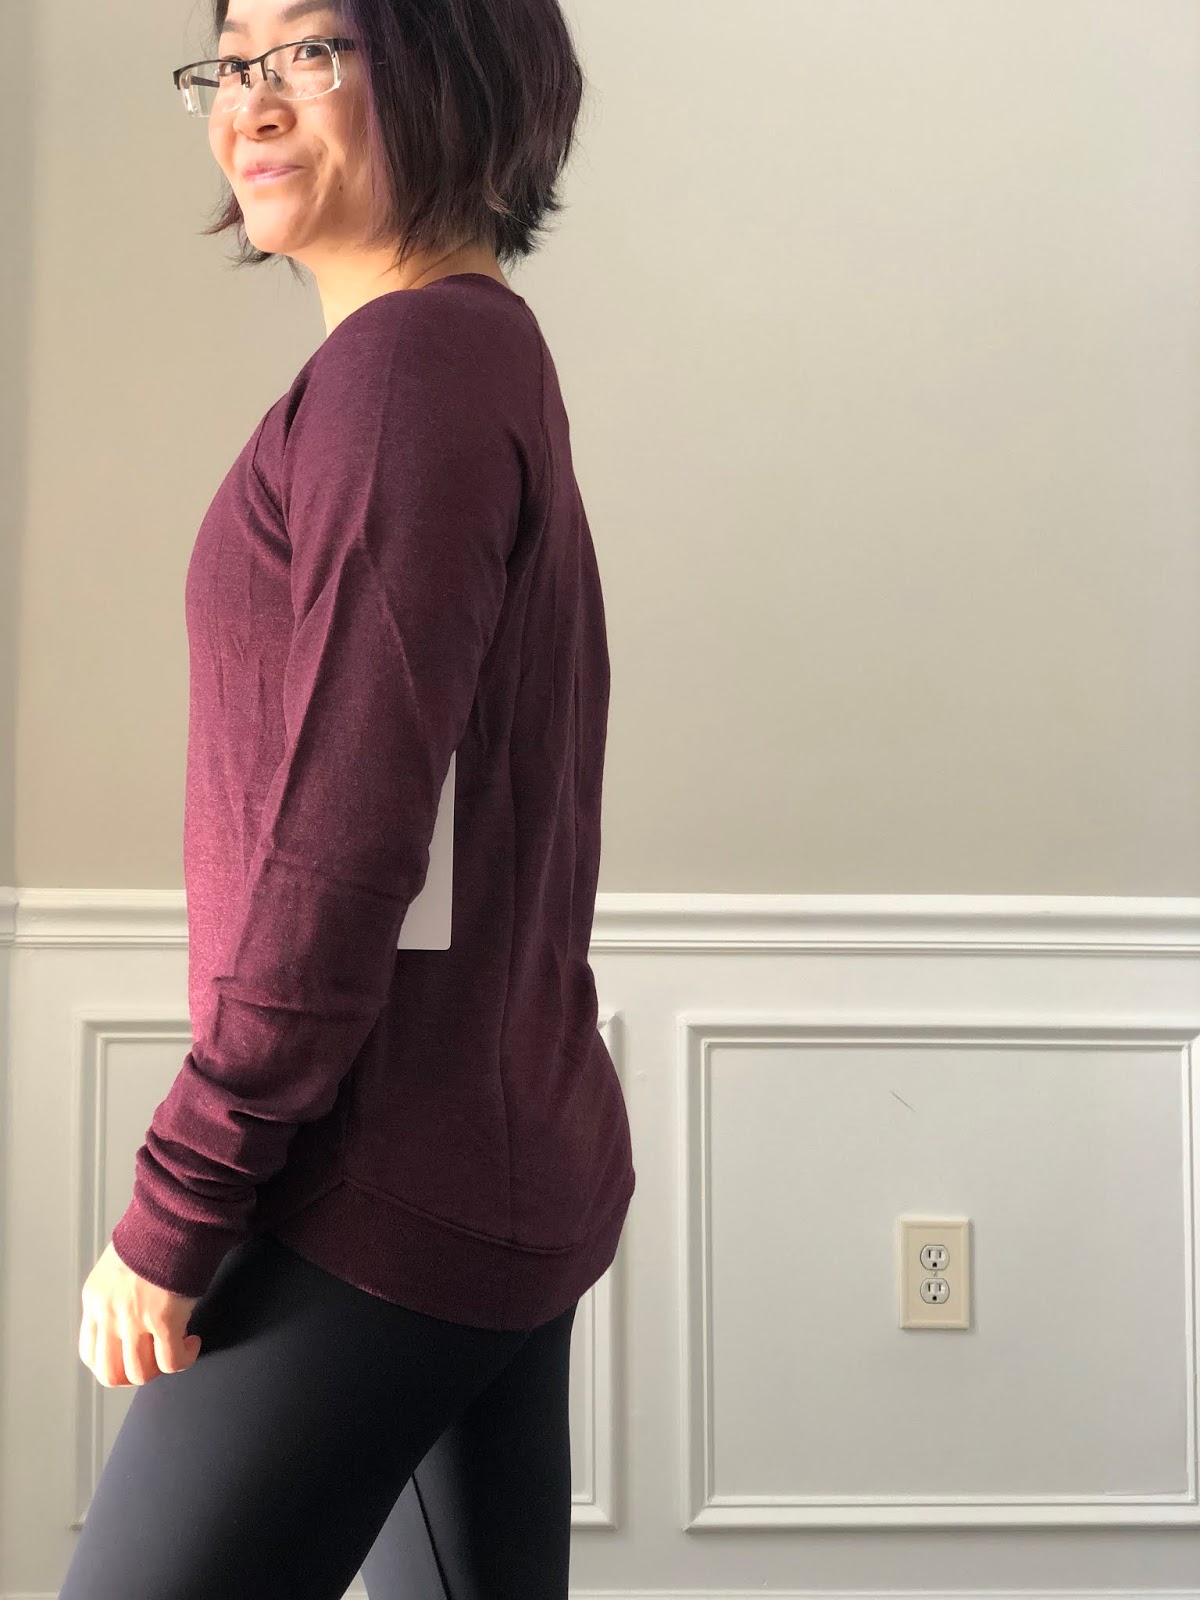 Fit Review Friday! Sweaty Betty Essentials Sweatshirt and Gary Luxe Fleece  Pants